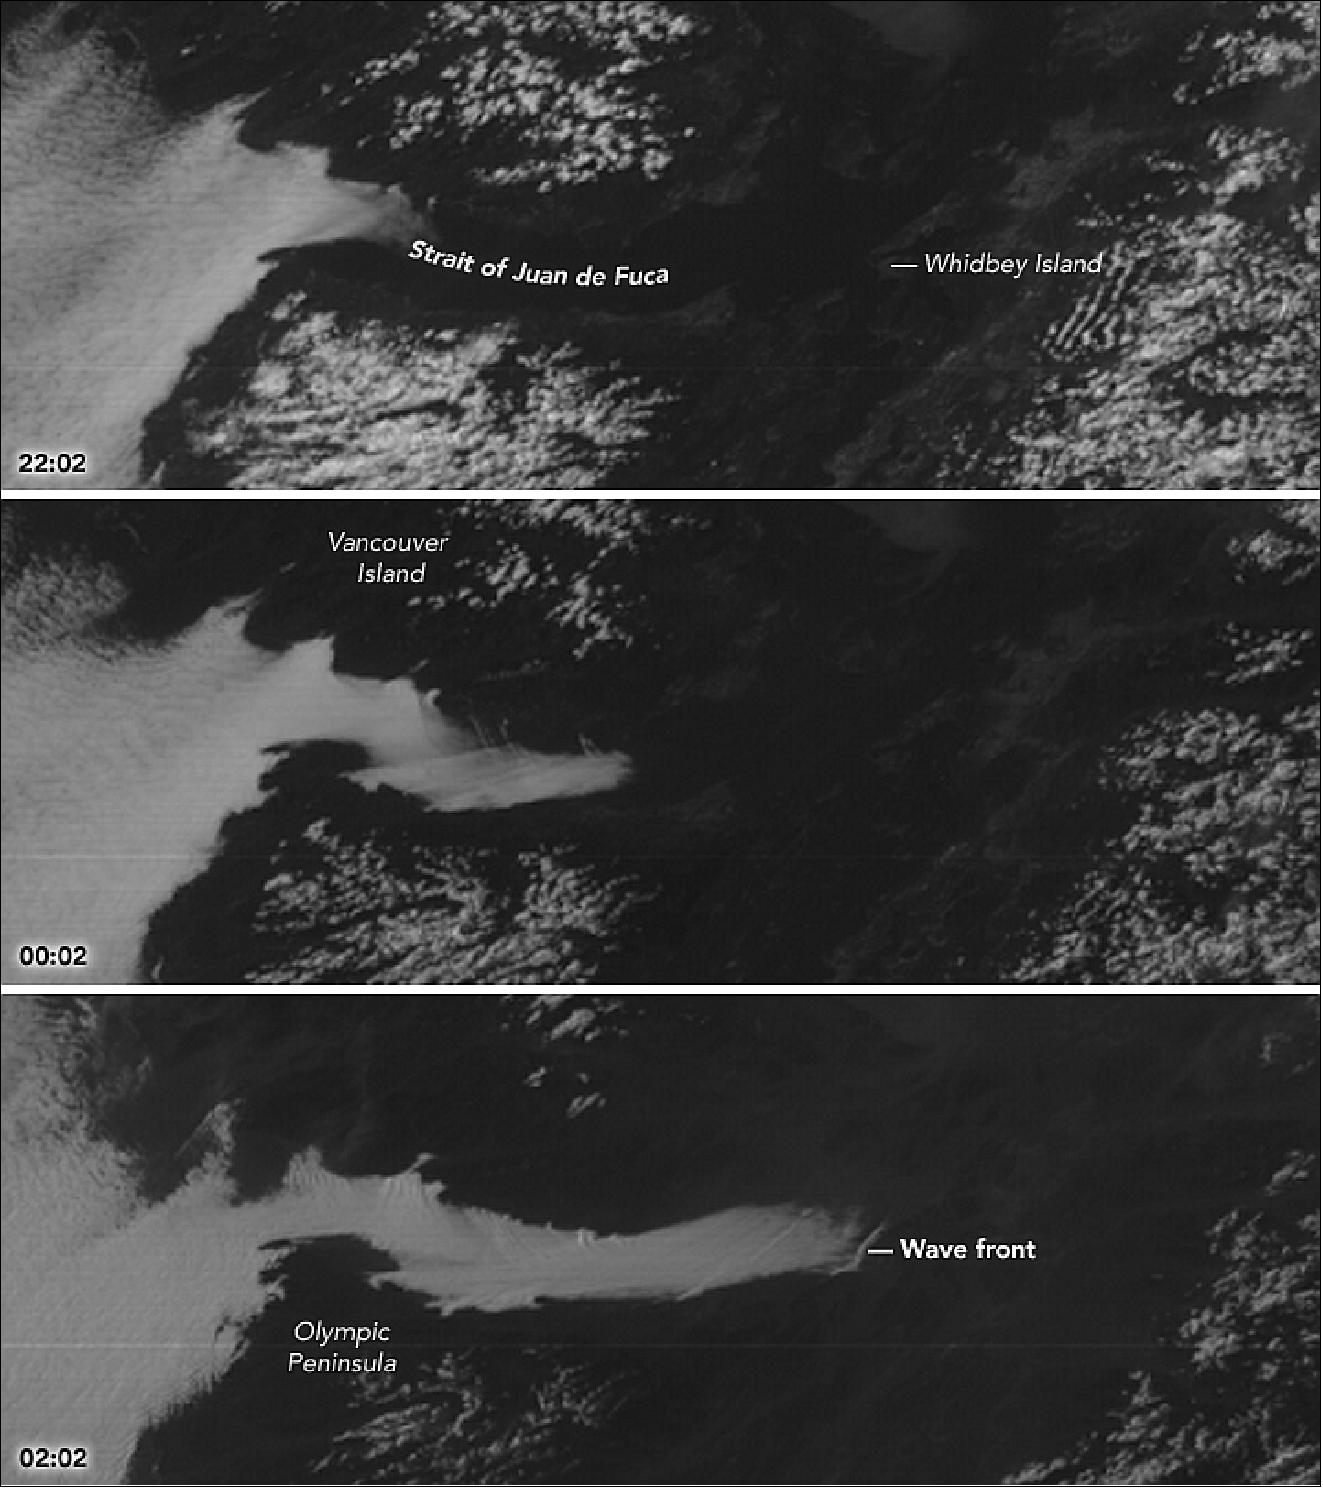 Figure 14: The images are based on preliminary, non-operational data from GOES-16. NOAA recently announced that GOES-16 will be moved to replace the GOES-East satellite by the end of 2017. In addition to observing weather on Earth, GOES-16 carries instruments for monitoring solar activity and space weather (image credit: NASA Earth Observatory images by Jesse Allen, using GOES 16 imagery provided courtesy of the CIMSS (Cooperative Institute for Meteorological Satellite Studies) at the University of Wisconsin. Story by Kathryn Hansen)